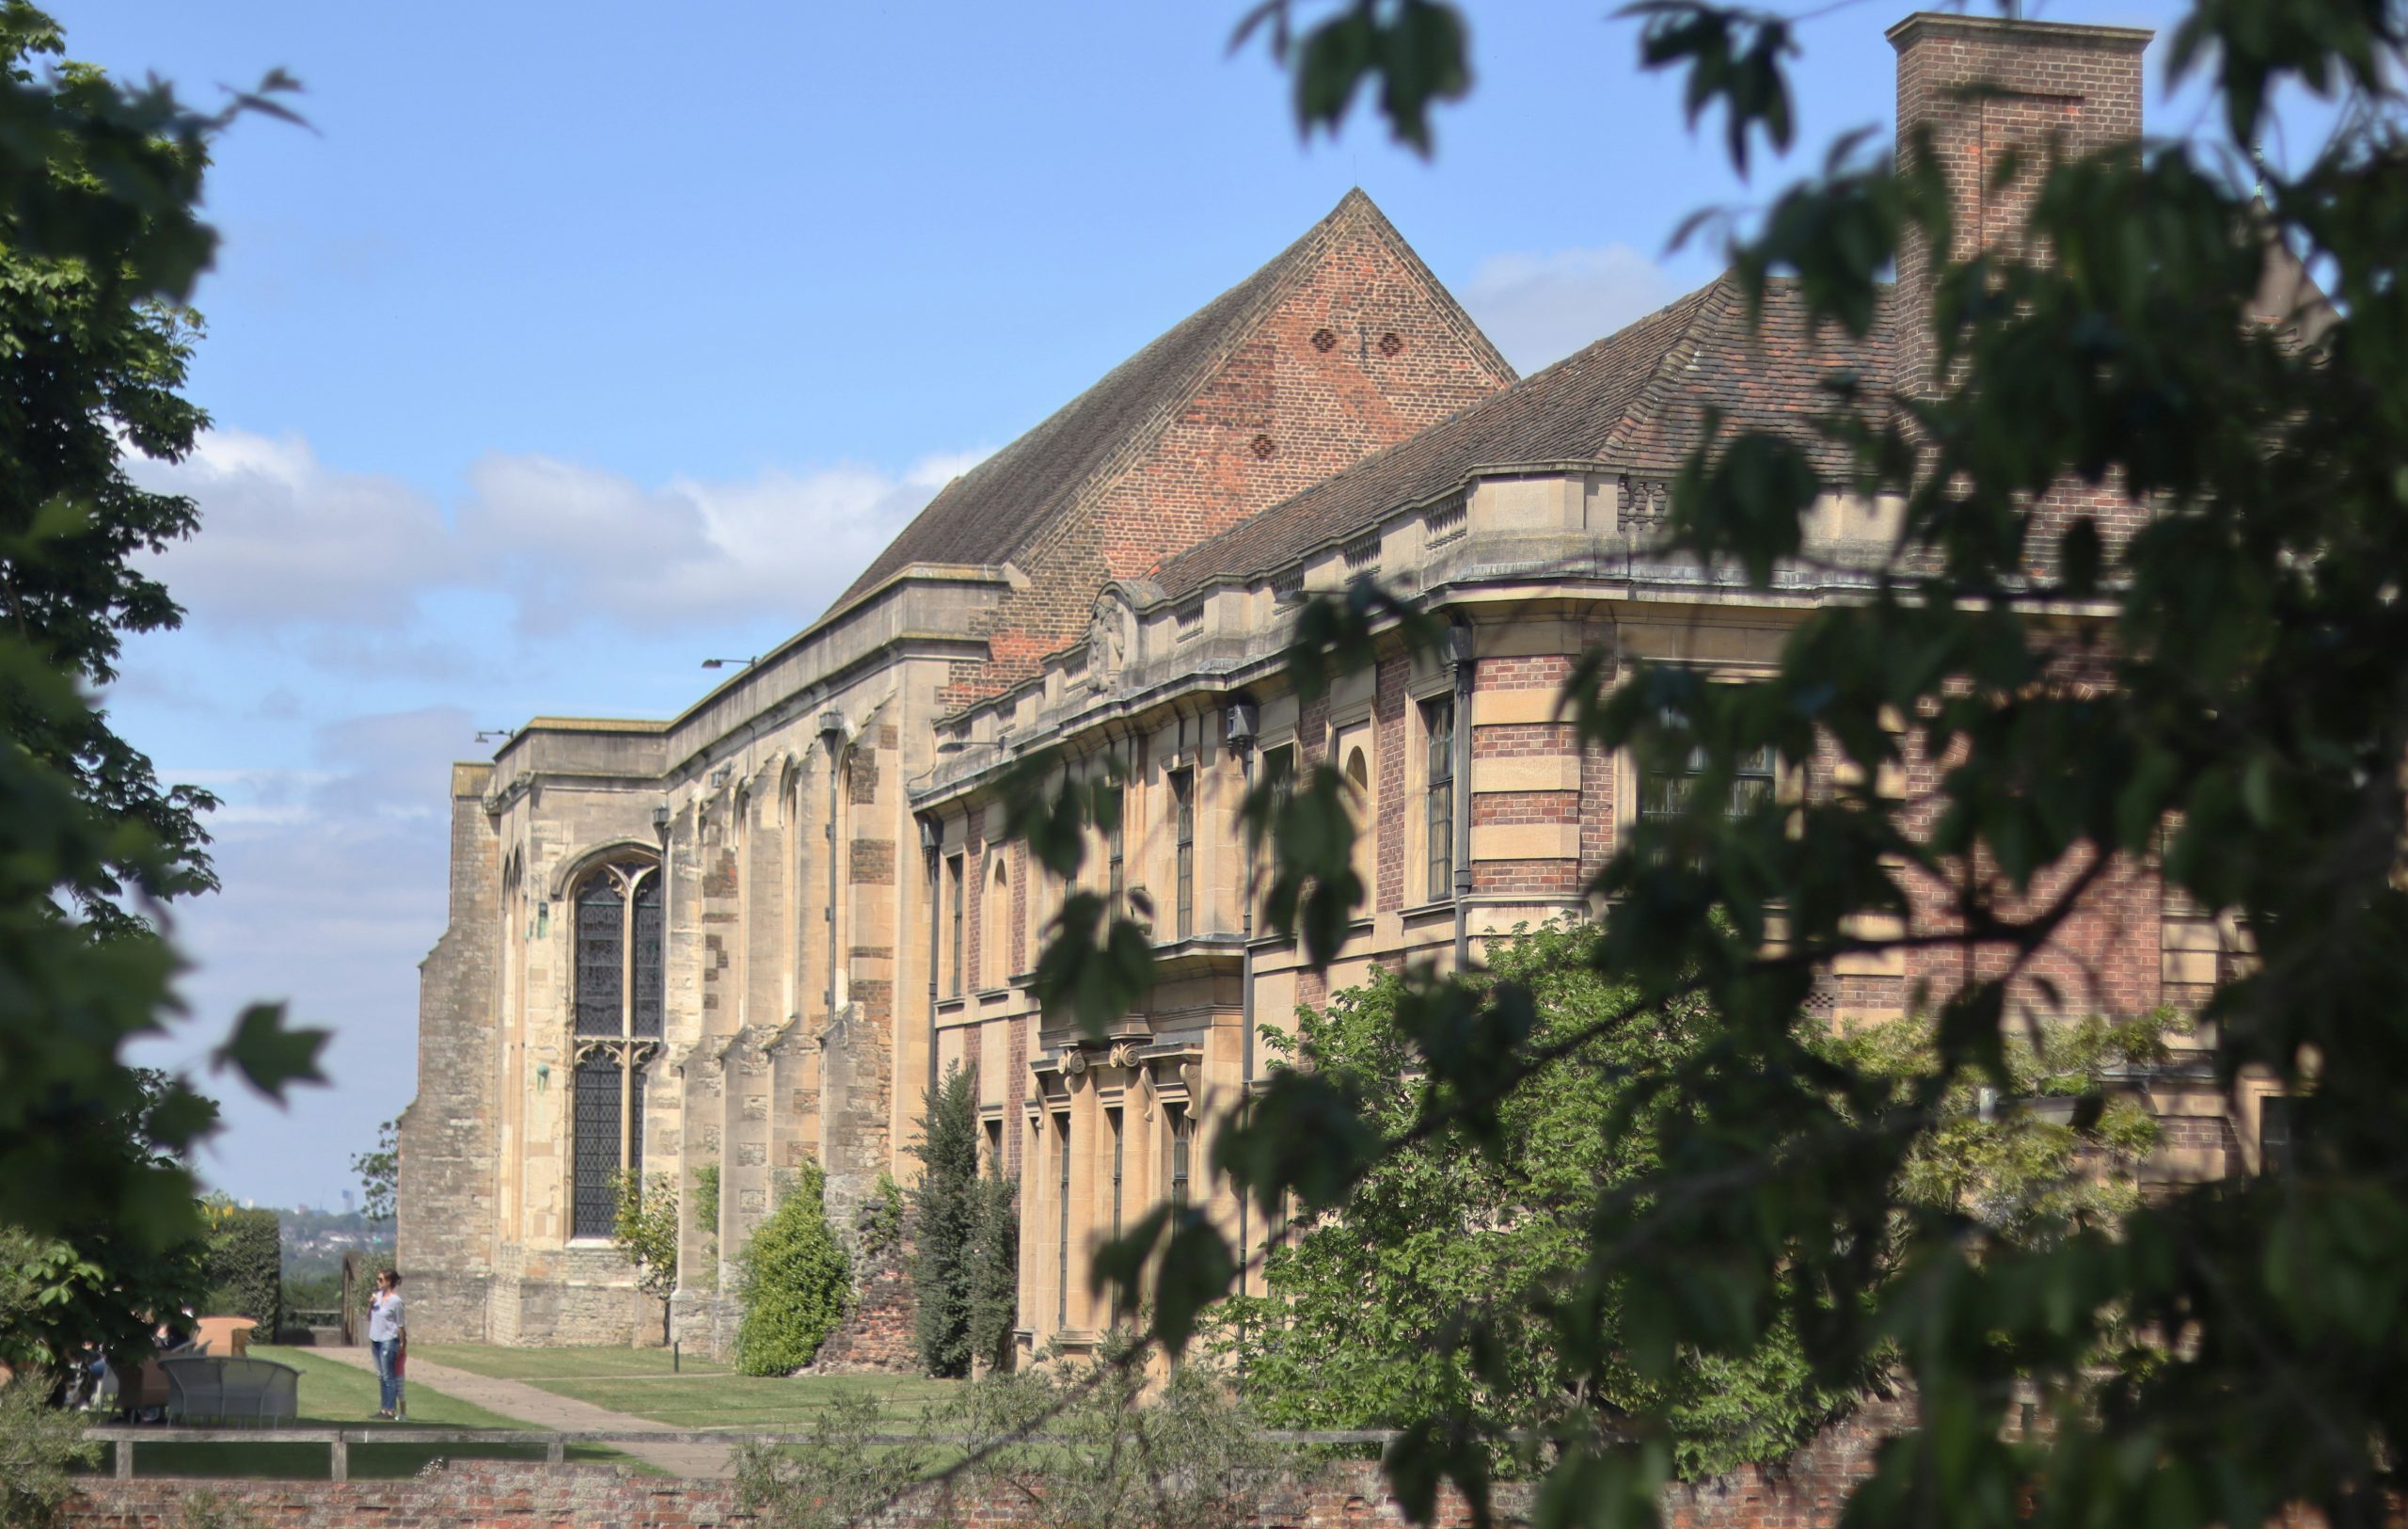 Eltham Palace, an option for Easter Day Trip by train